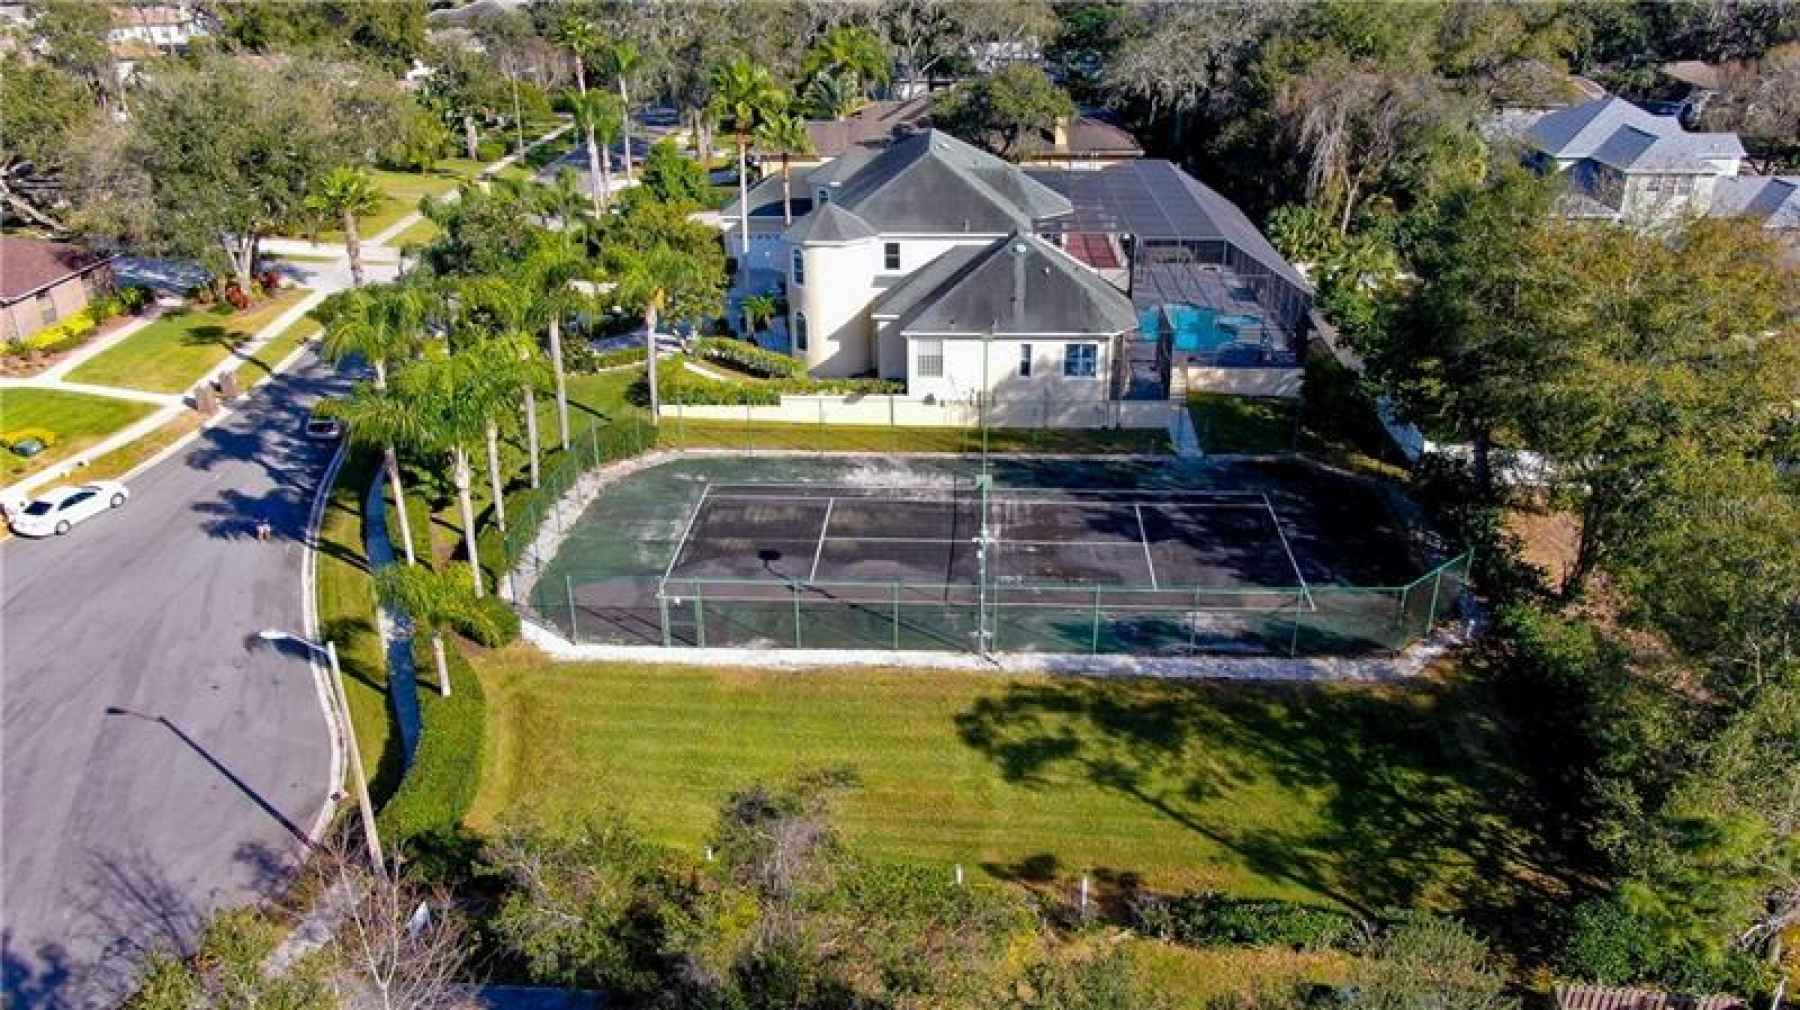 This tennis court is your very own PRIVATE one!